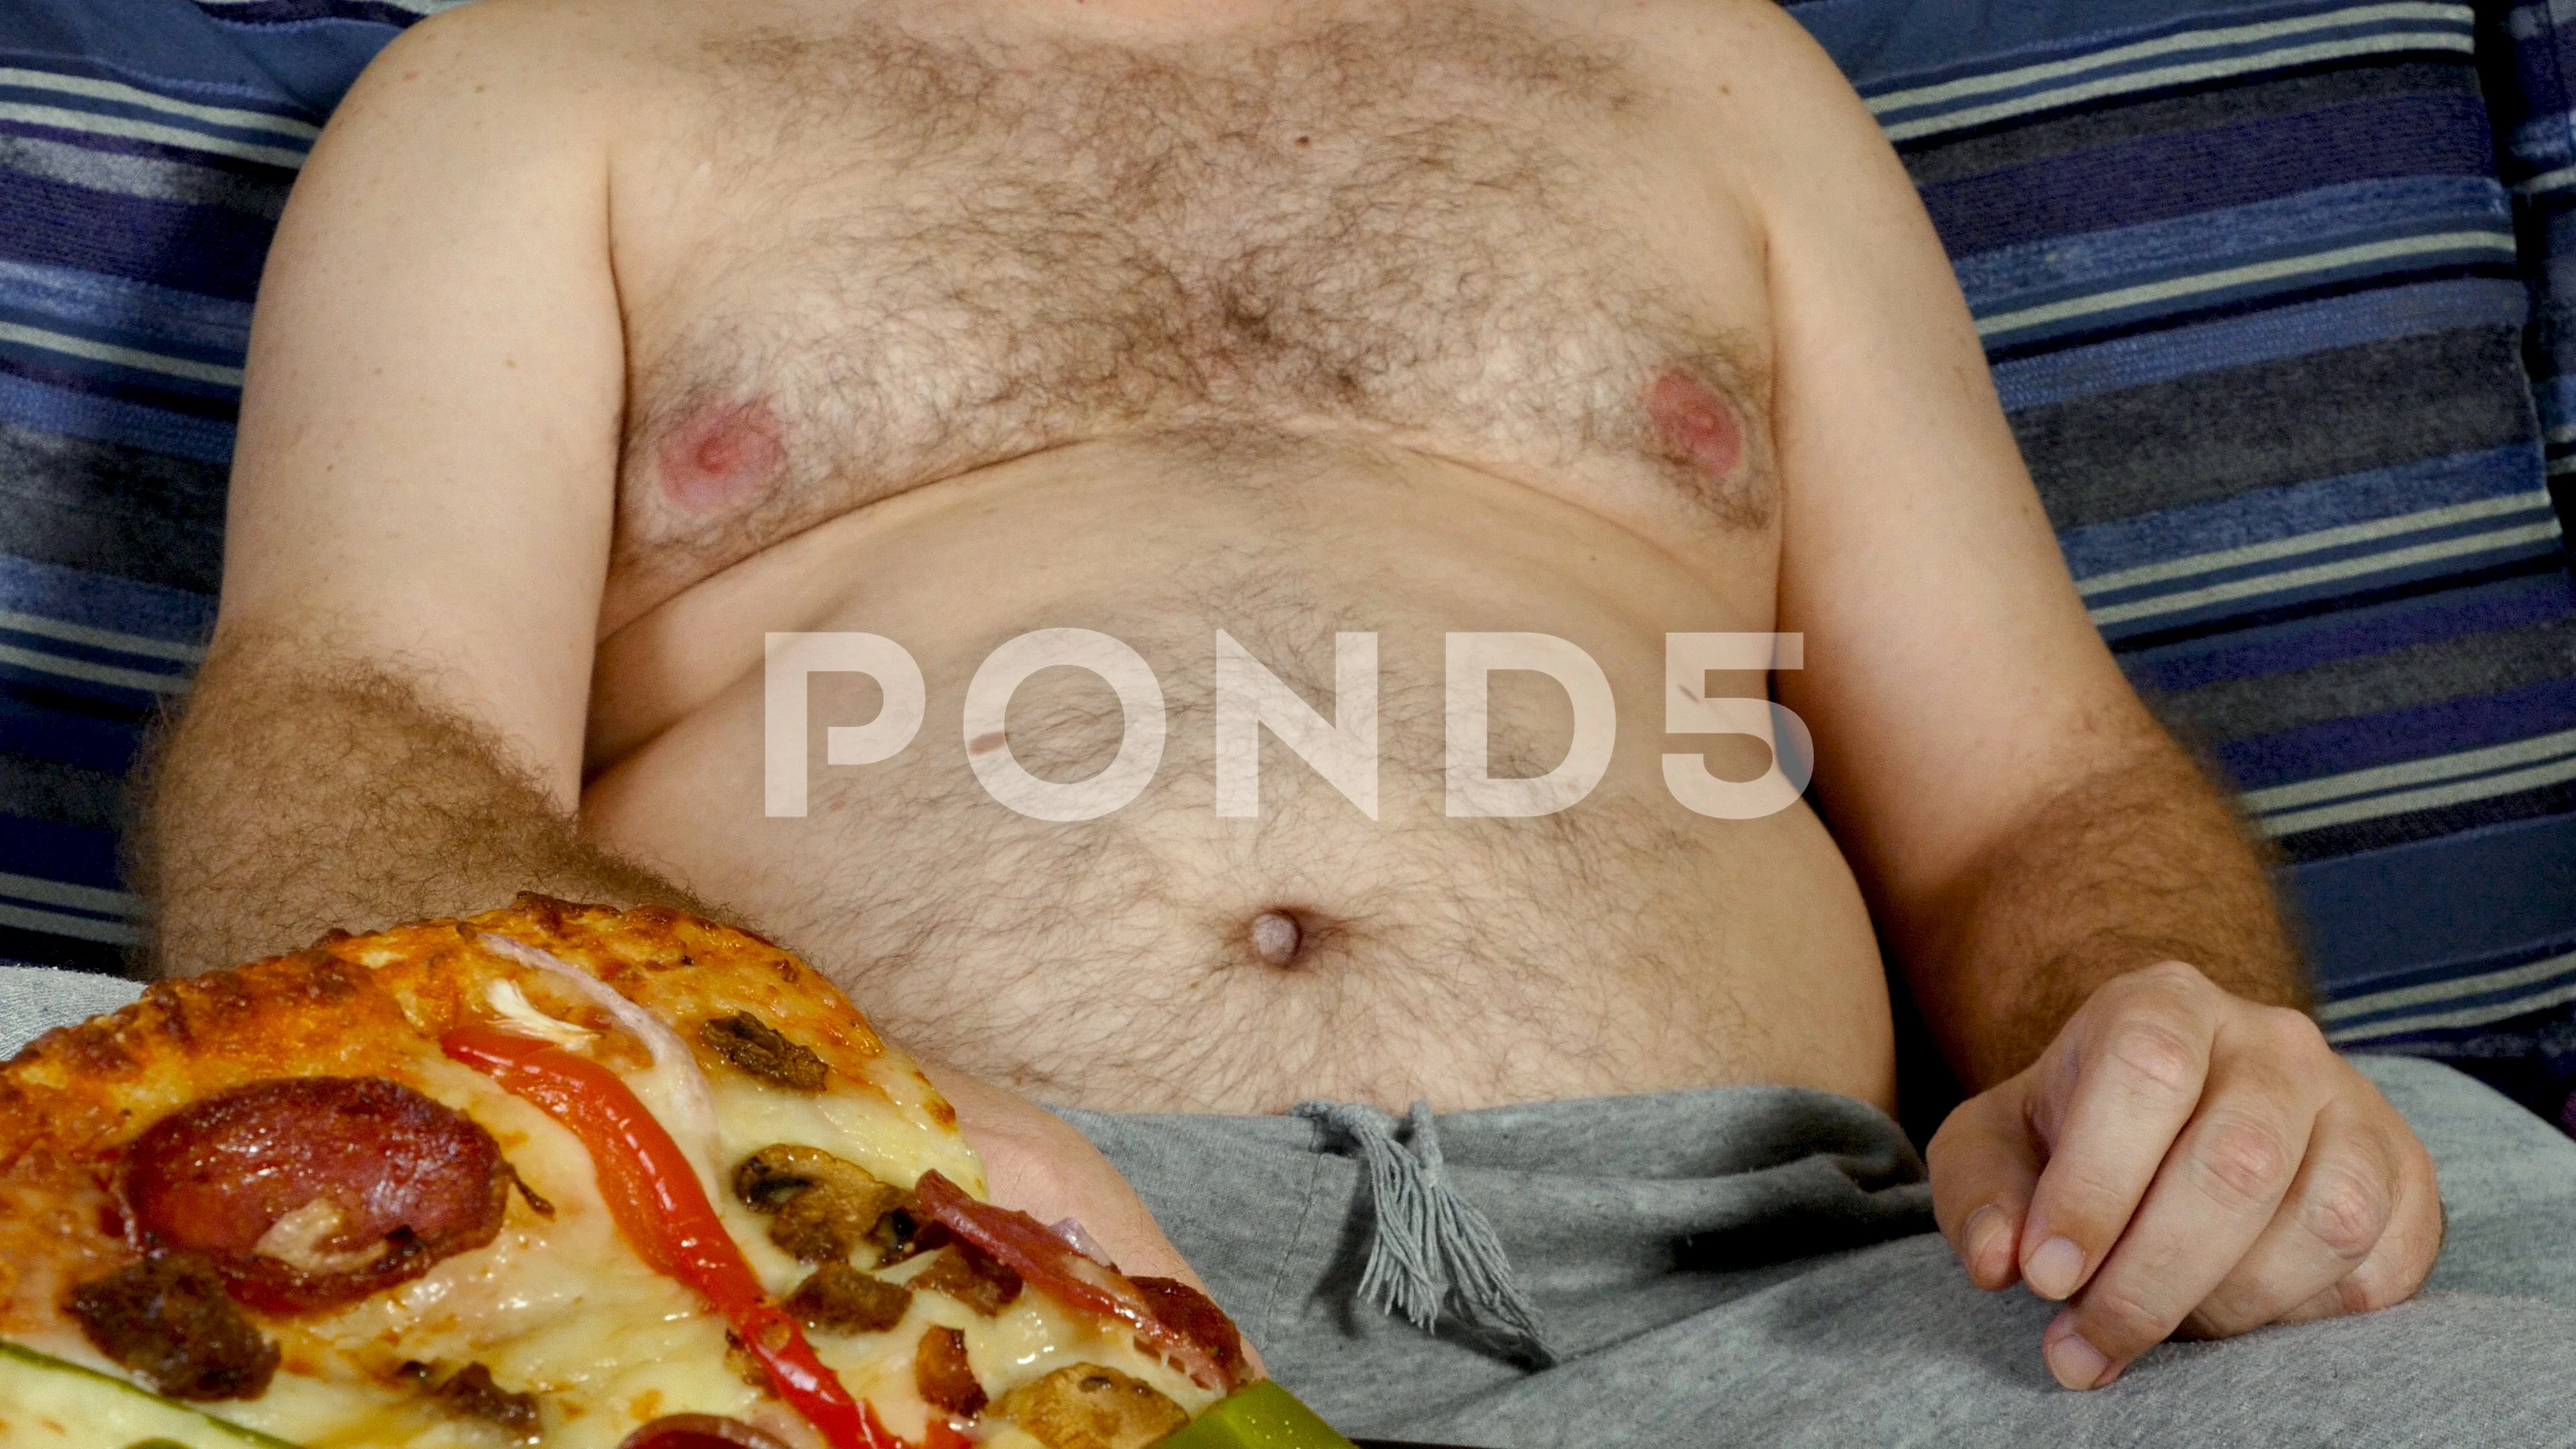 fat person eating pizza